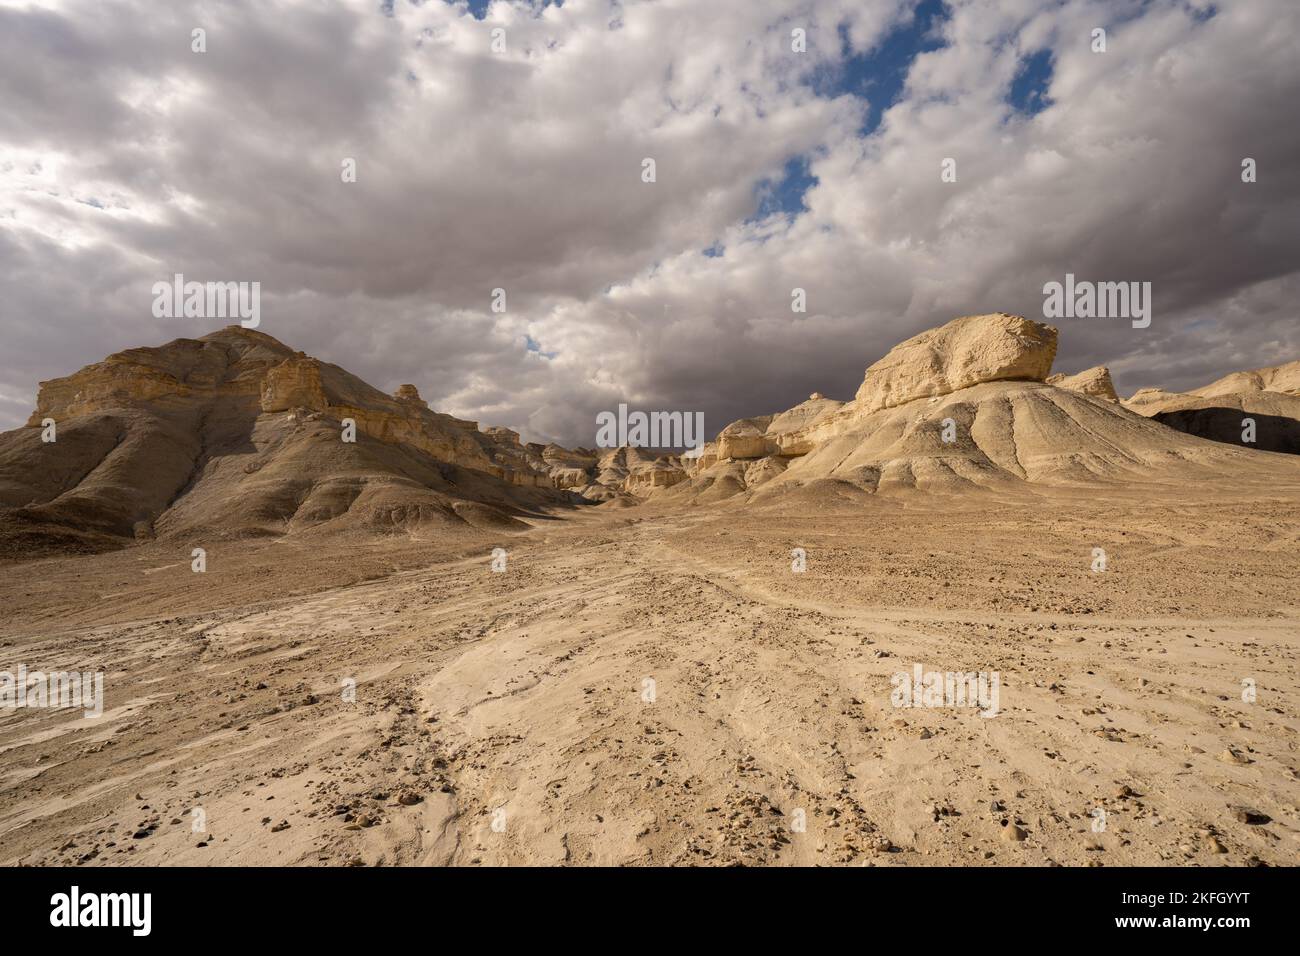 Clouds in the Judean desert Stock Photo